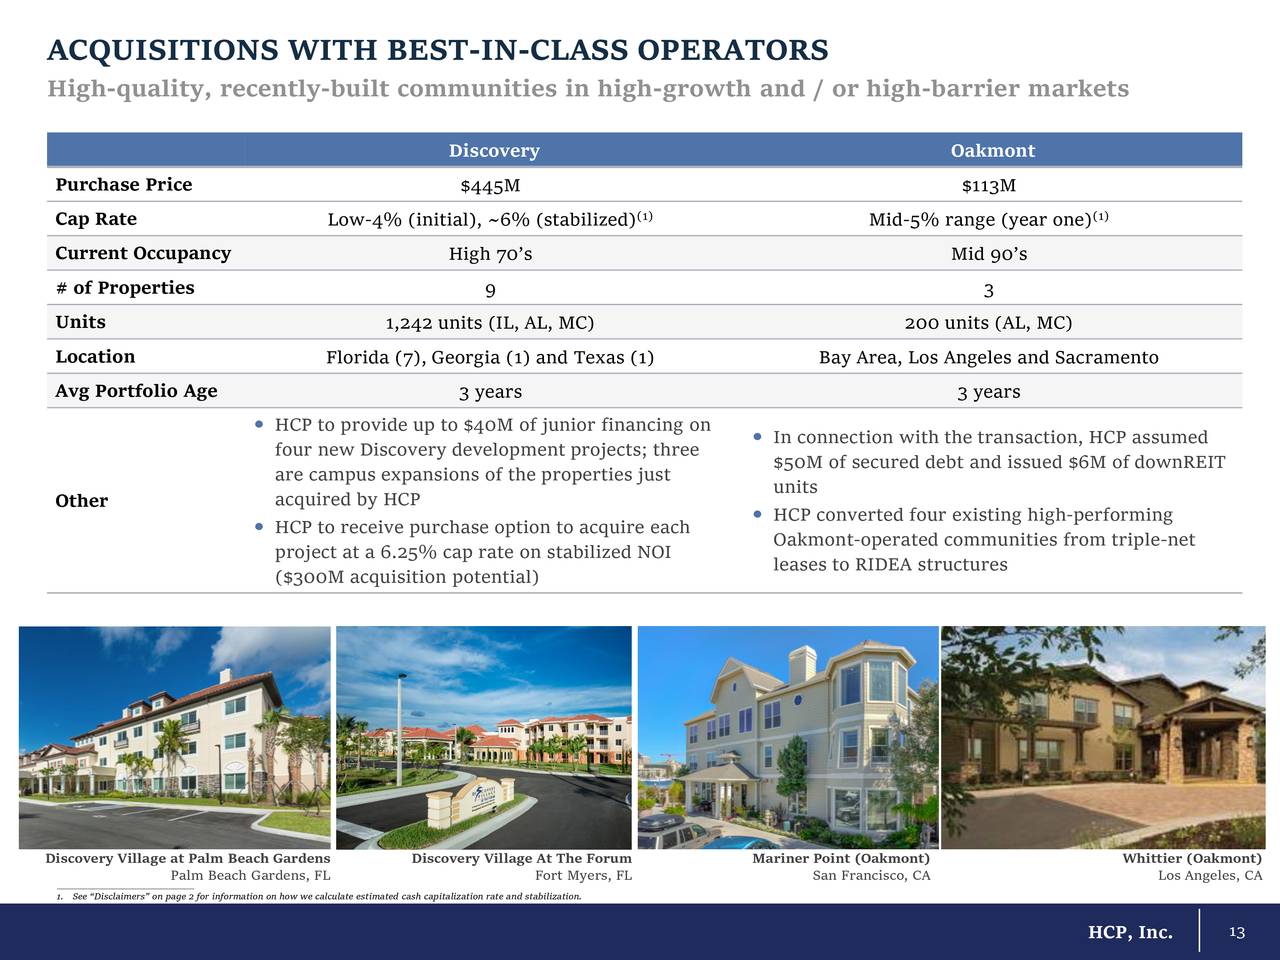 ACQUISITIONS WITH BEST-IN-CLASS OPERATORS